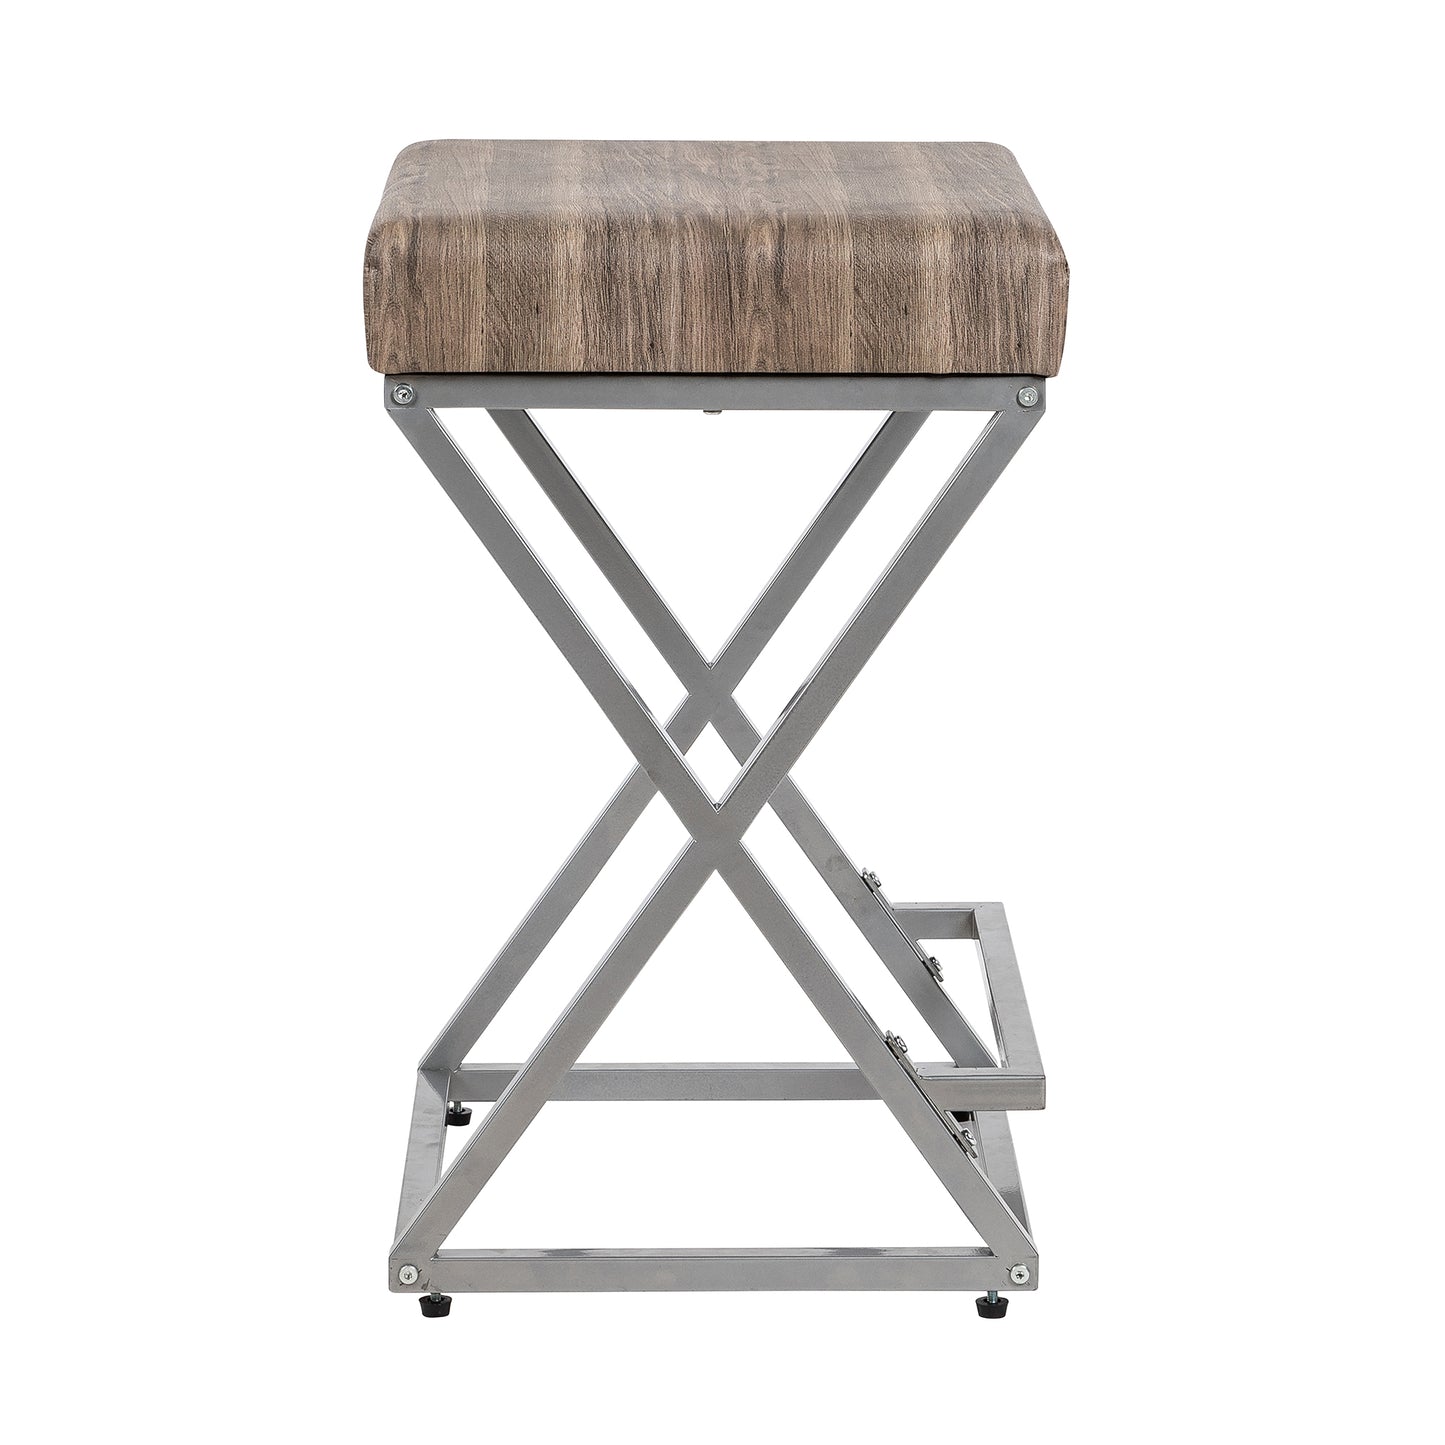 Metal Bar Stool with Footrest(set of 2)